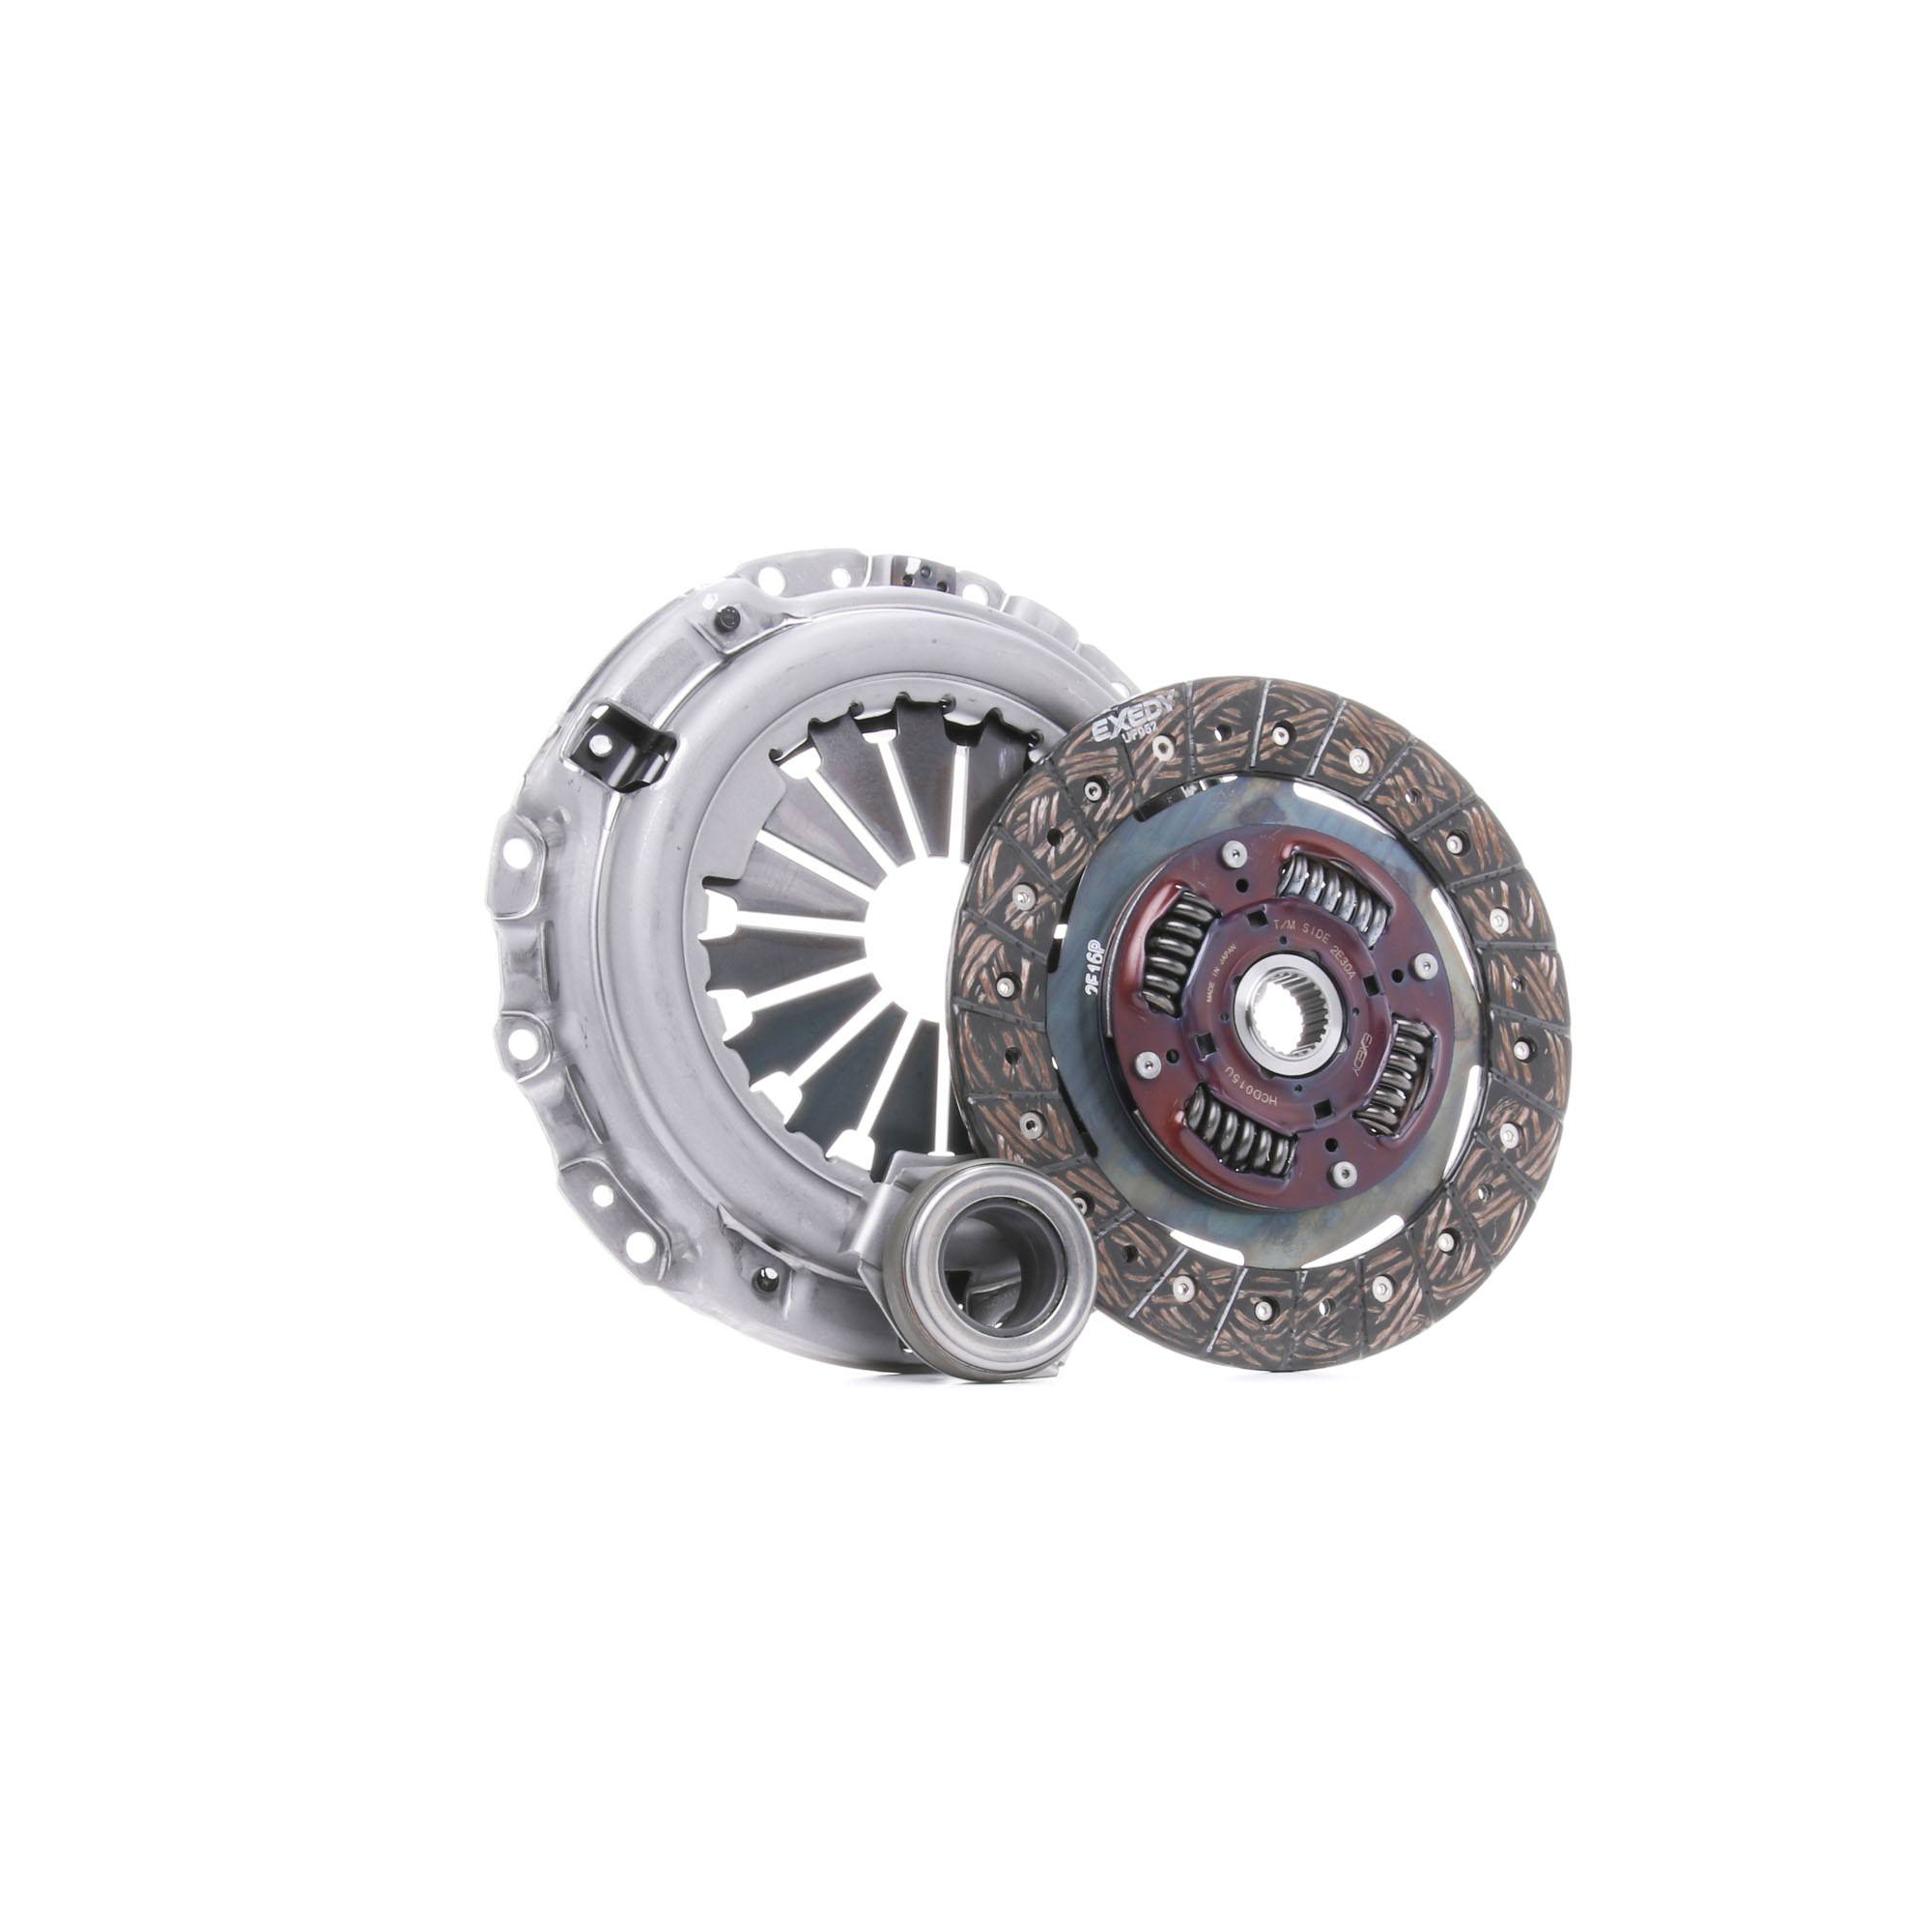 EXEDY HCK2021 Clutch kit SMART experience and price